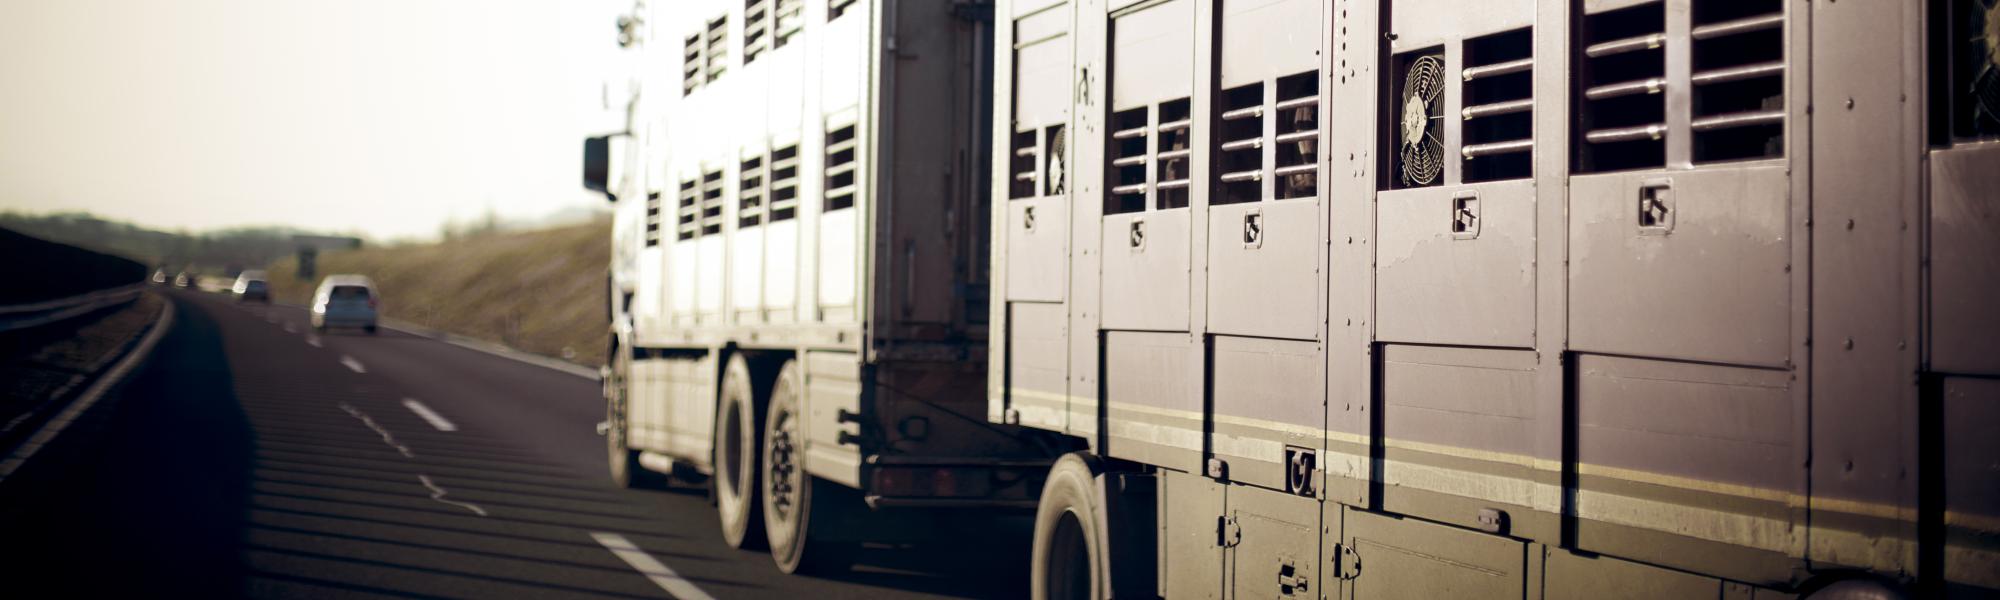 Protecting animals during transport: EU needs better, more applicable rules